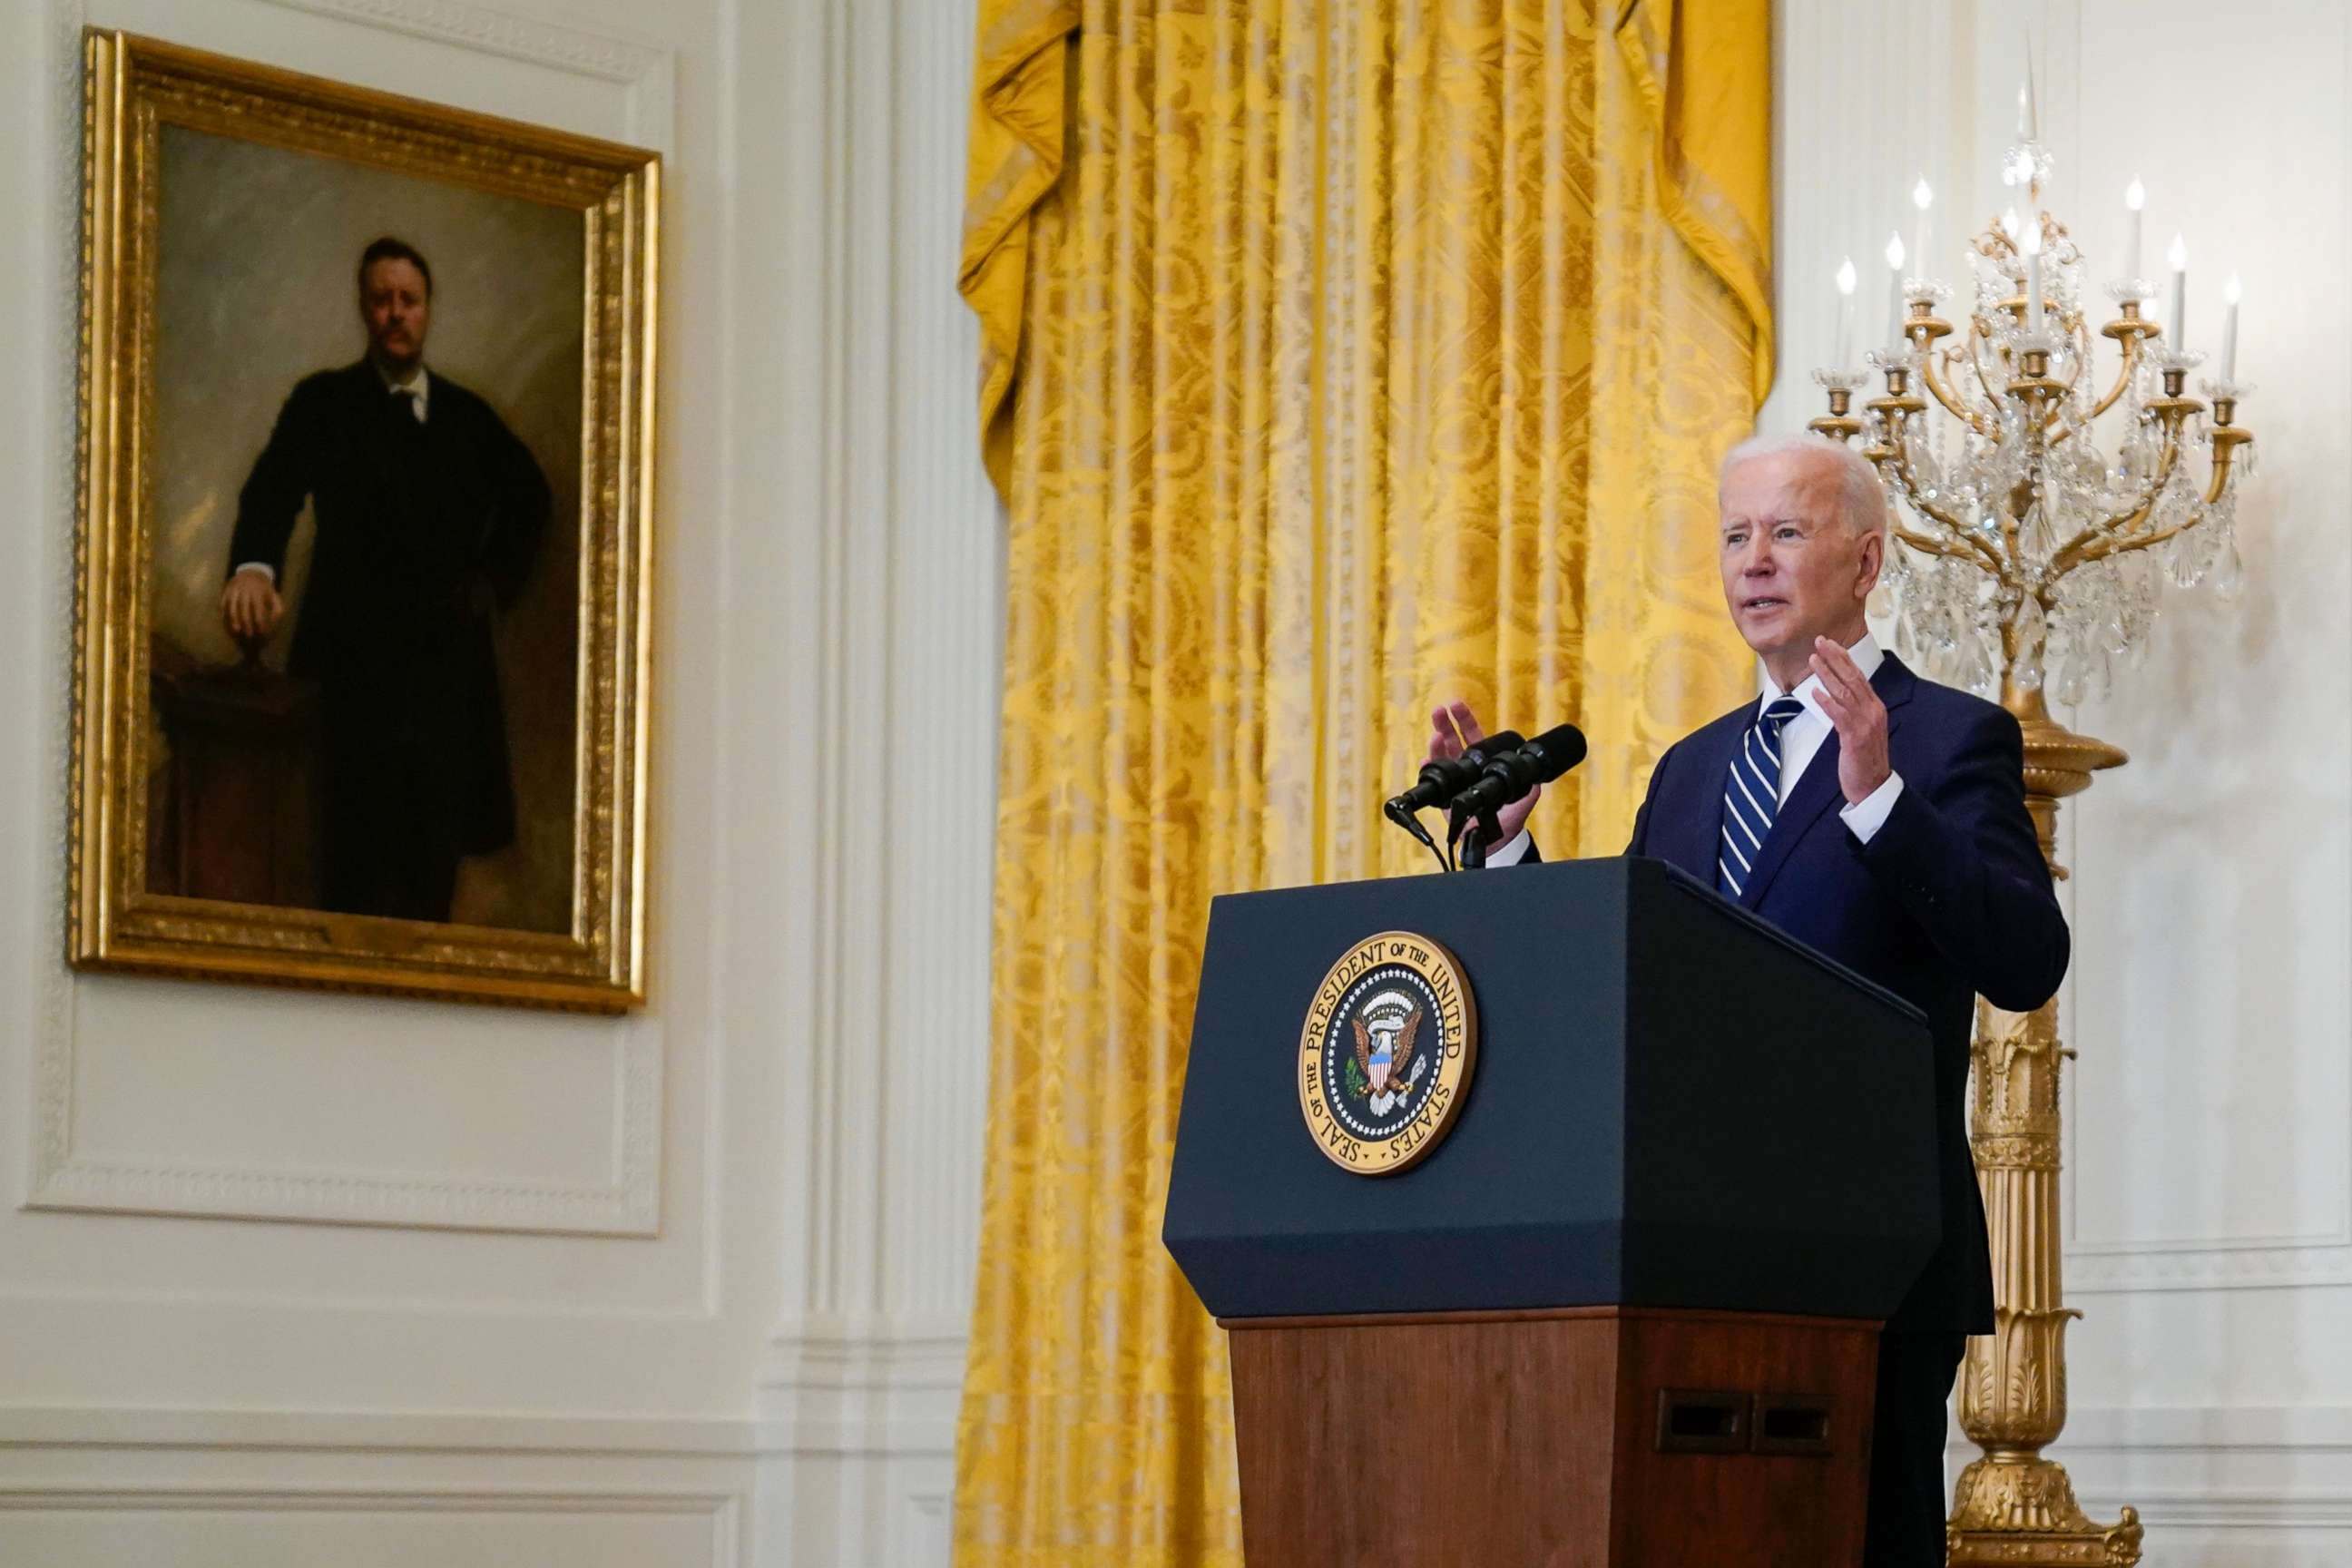 PHOTO: President Joe Biden speaks during a news conference in the East Room of the White House, March 25, 2021.